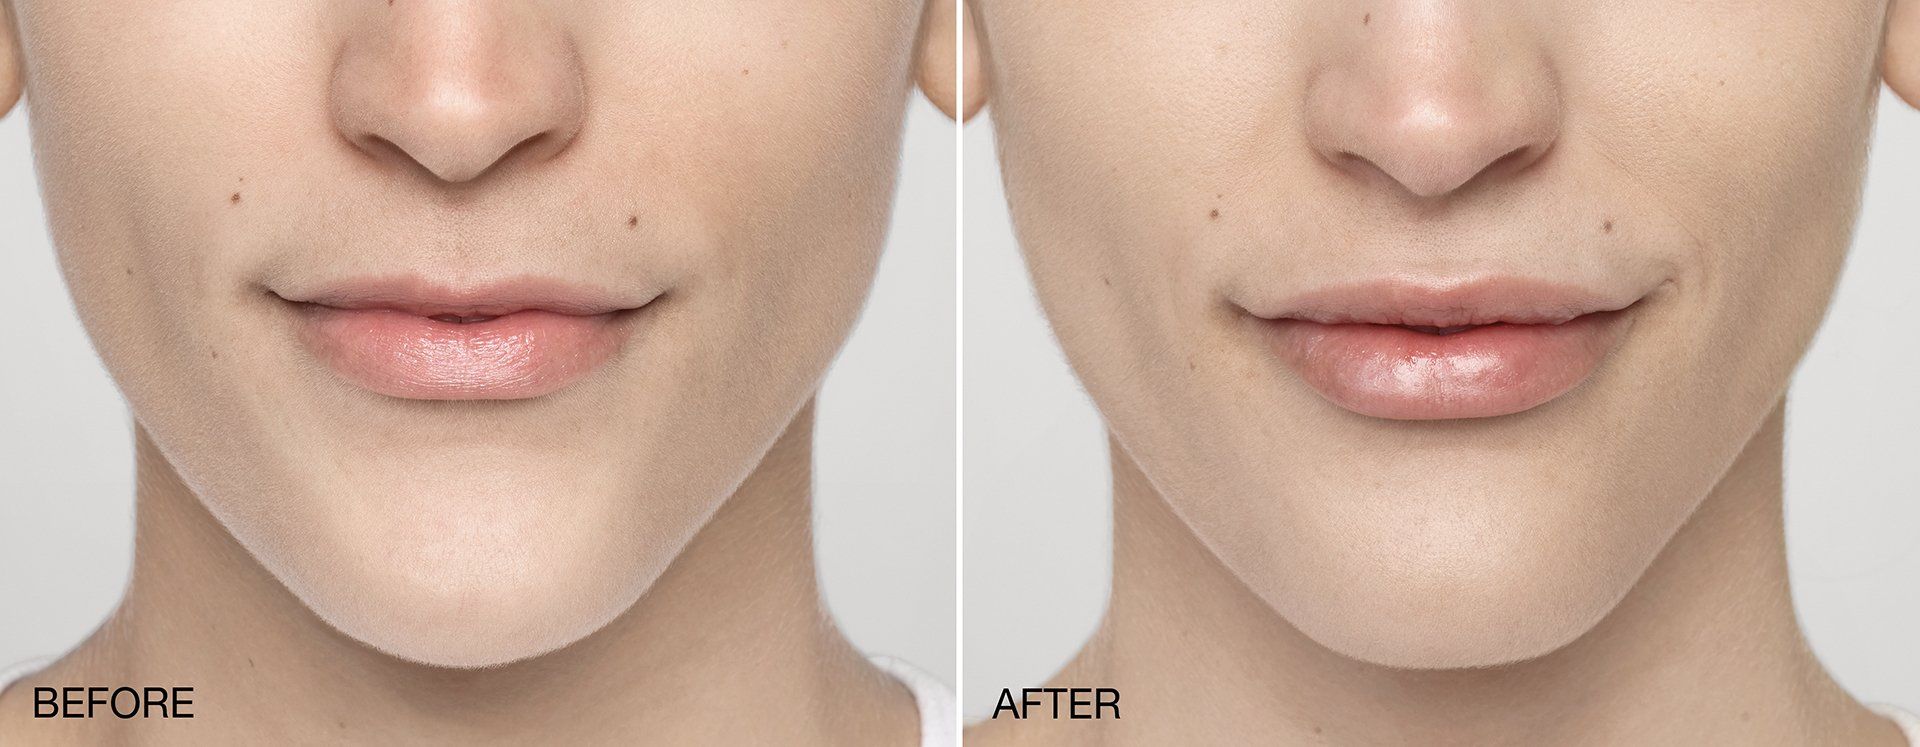 Before and after dermal fillers photo